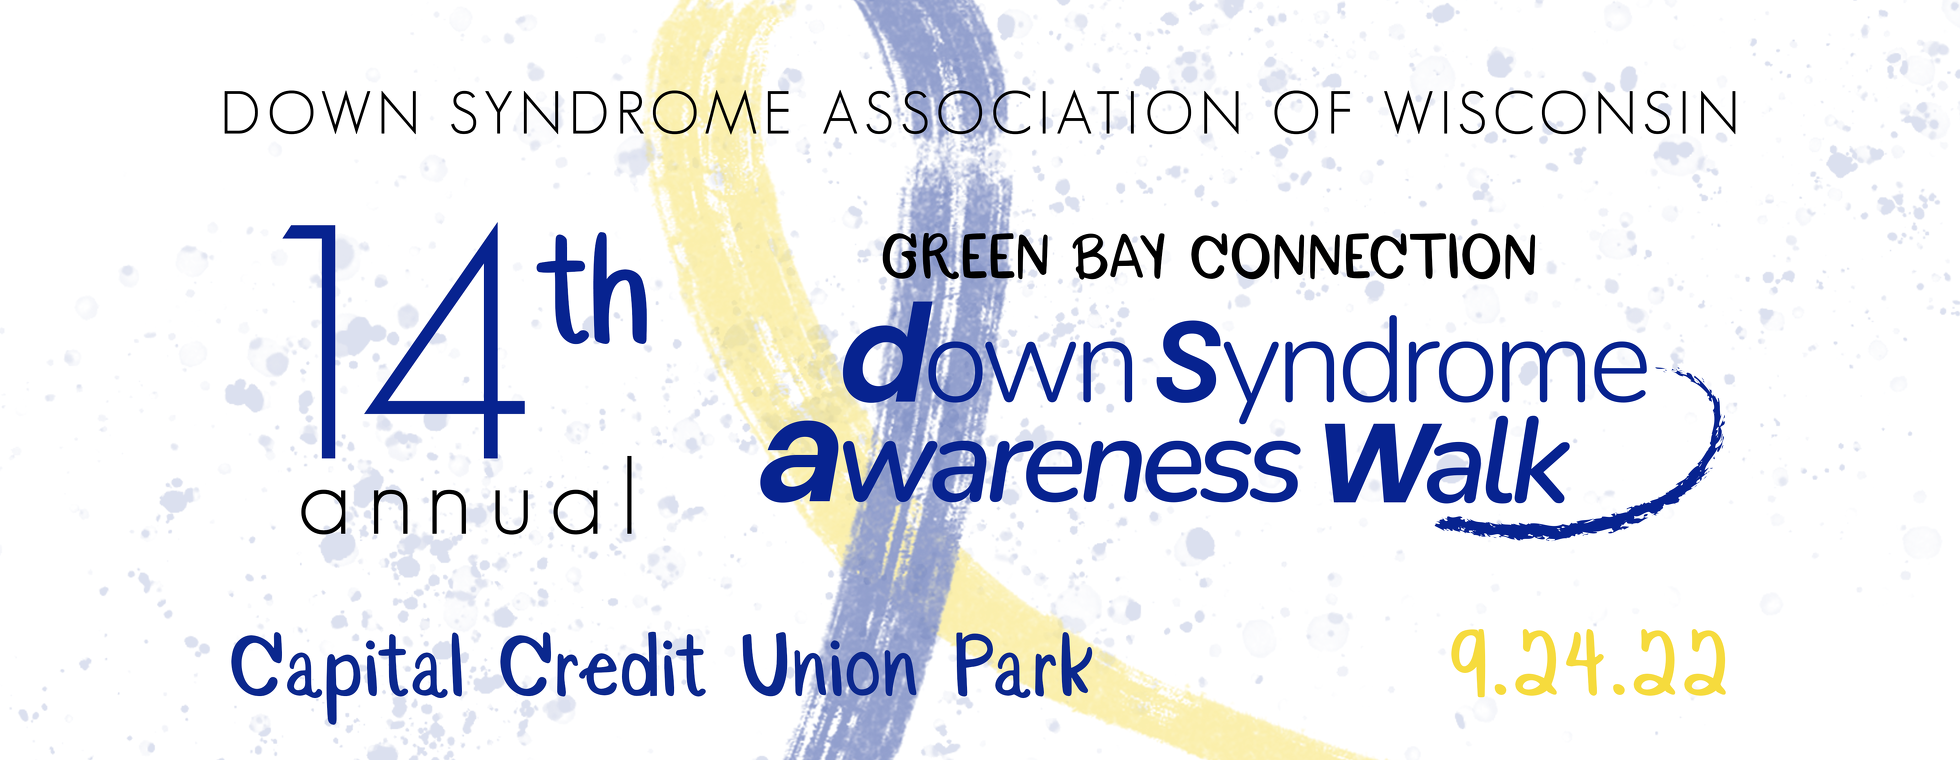 14th Annual DSAW-Green Bay Down Syndrome Awareness Walk